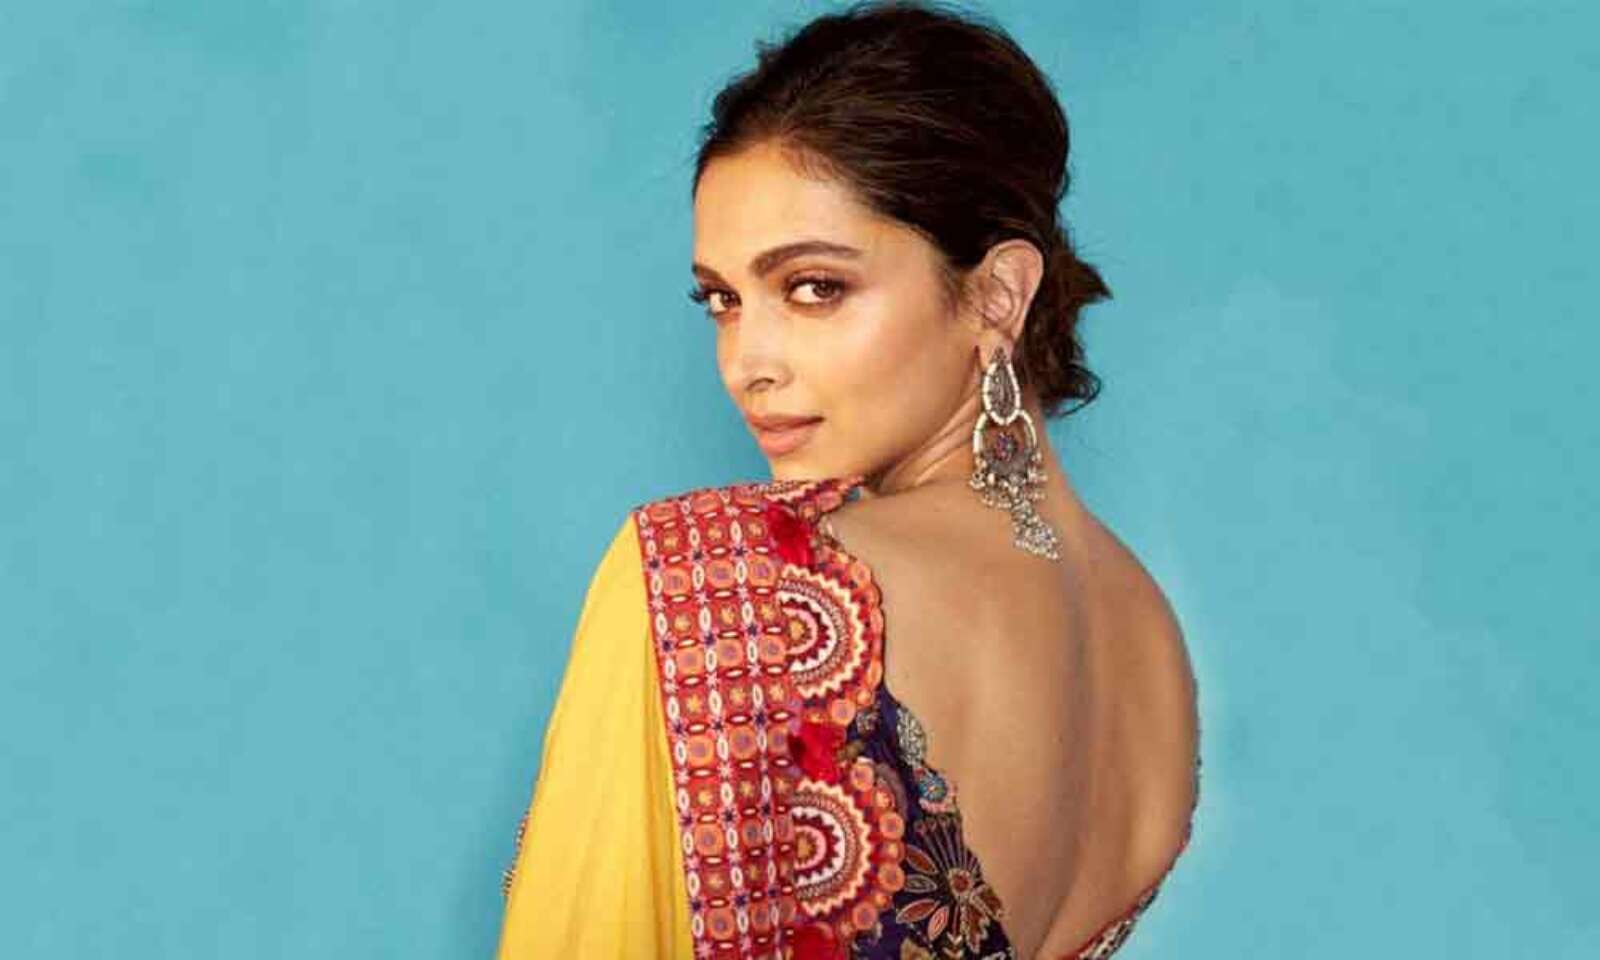 Deepika Padukone Live Sex Video - Sex is not just about physicality, says Deepika Padukone